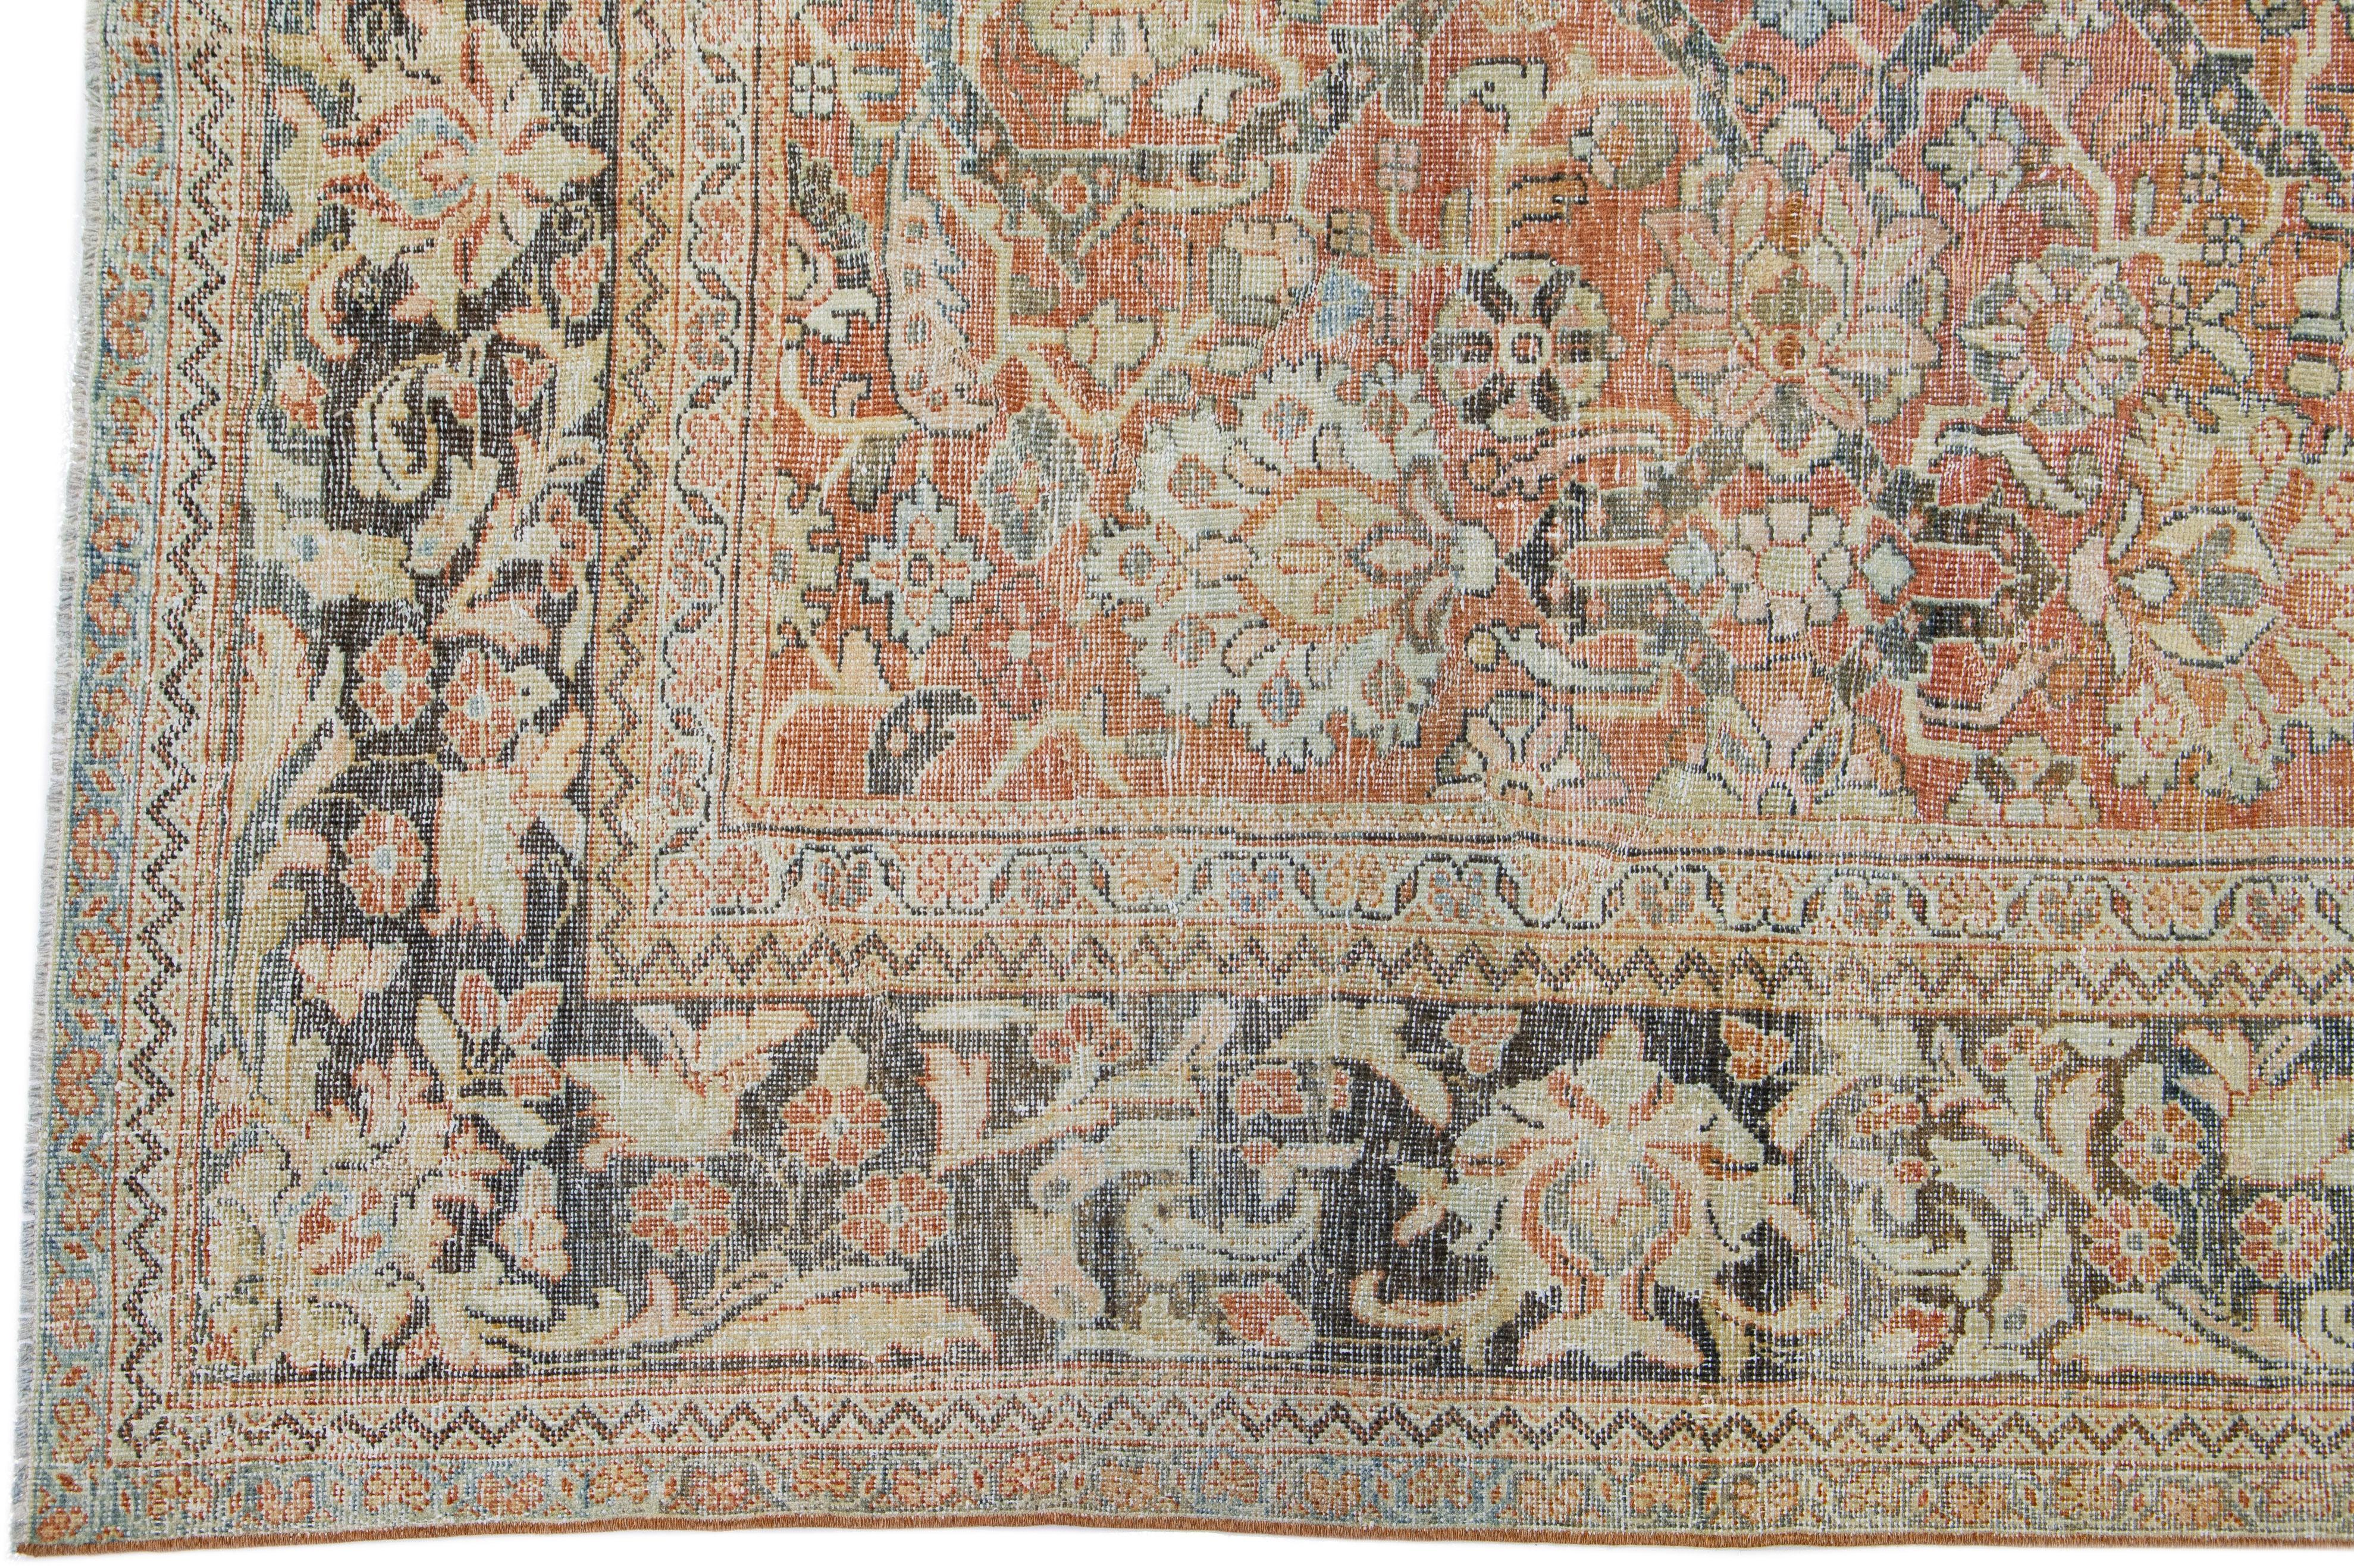 Oversize Antique Persian Mahal Wool Rug with Allover Orange/Rust Field In Good Condition For Sale In Norwalk, CT